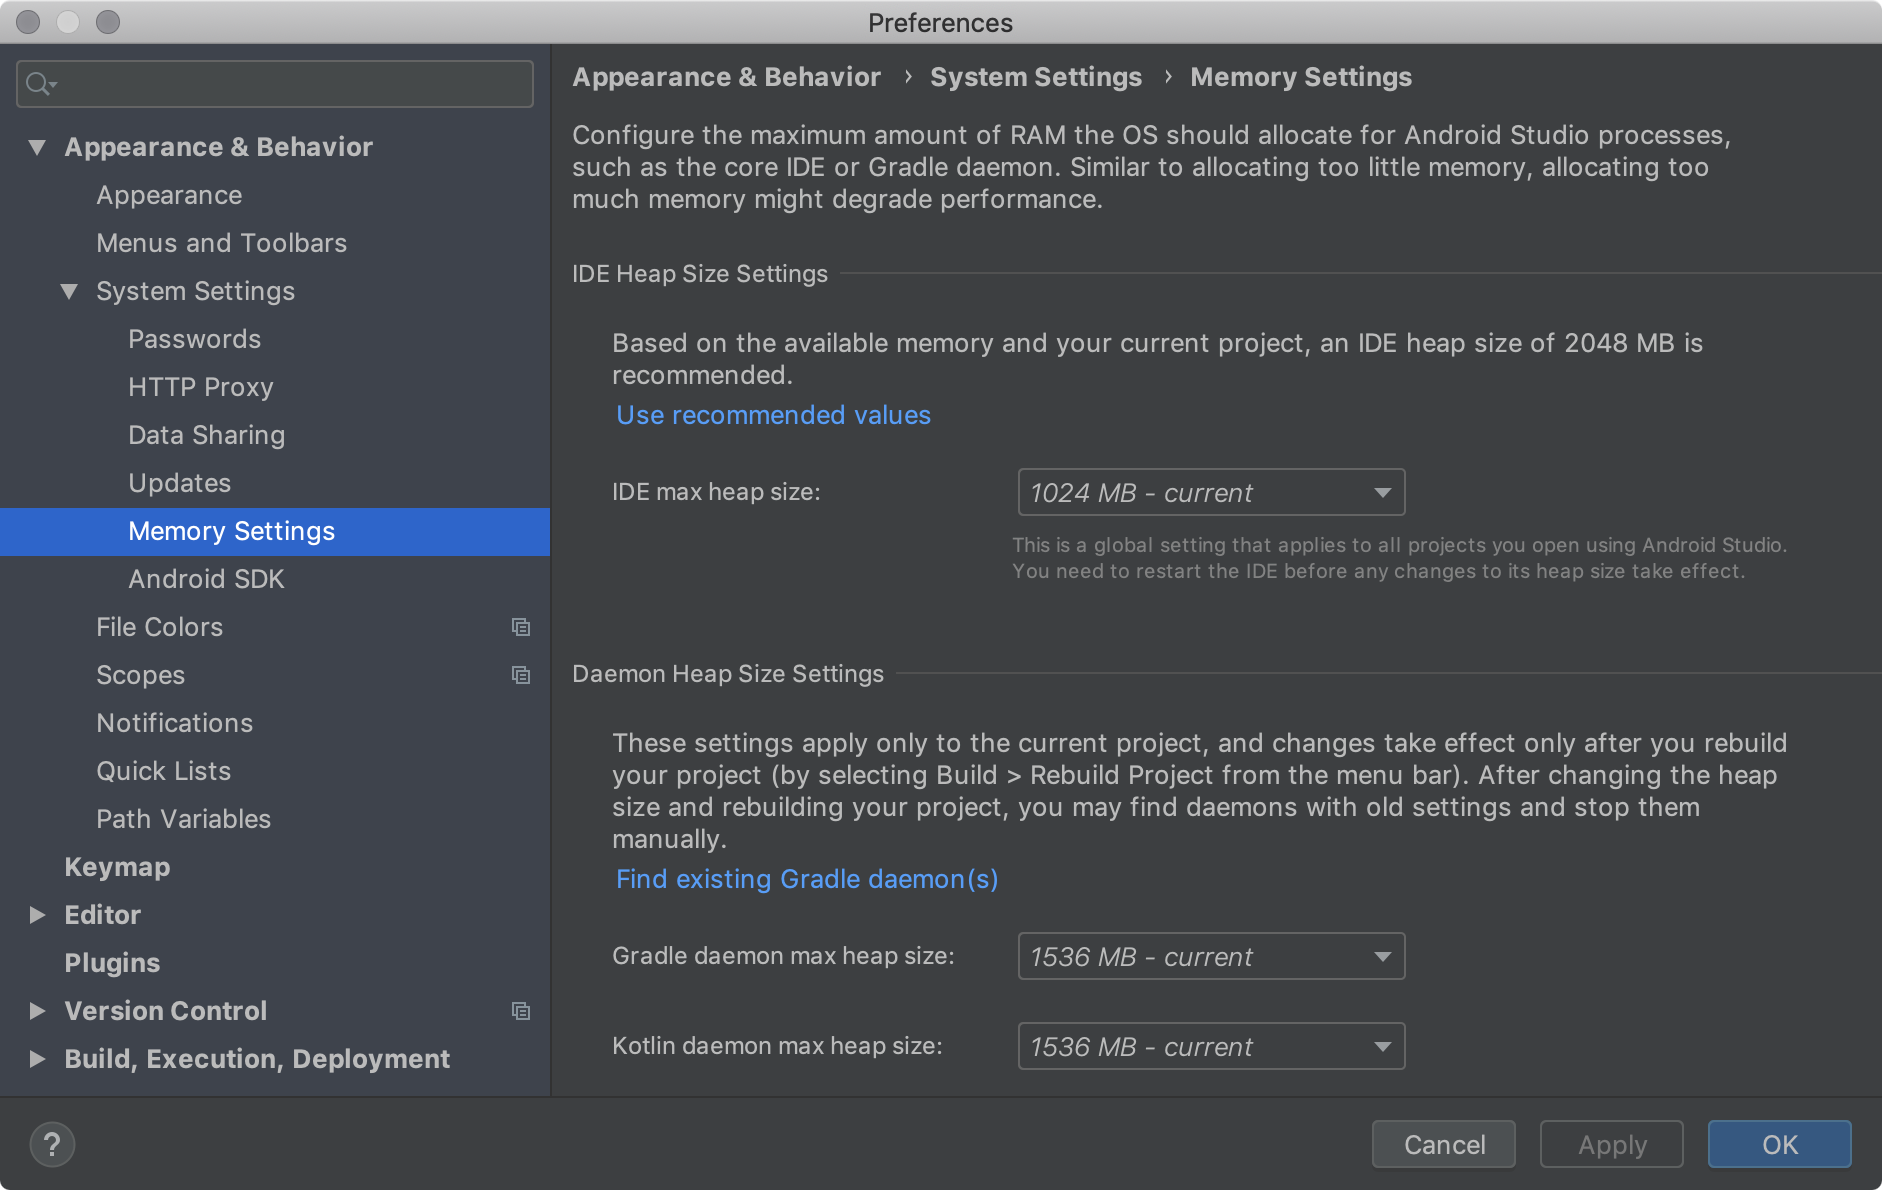 The memory settings, which let you configure maximum amount of RAM
   for Android Studio processes.